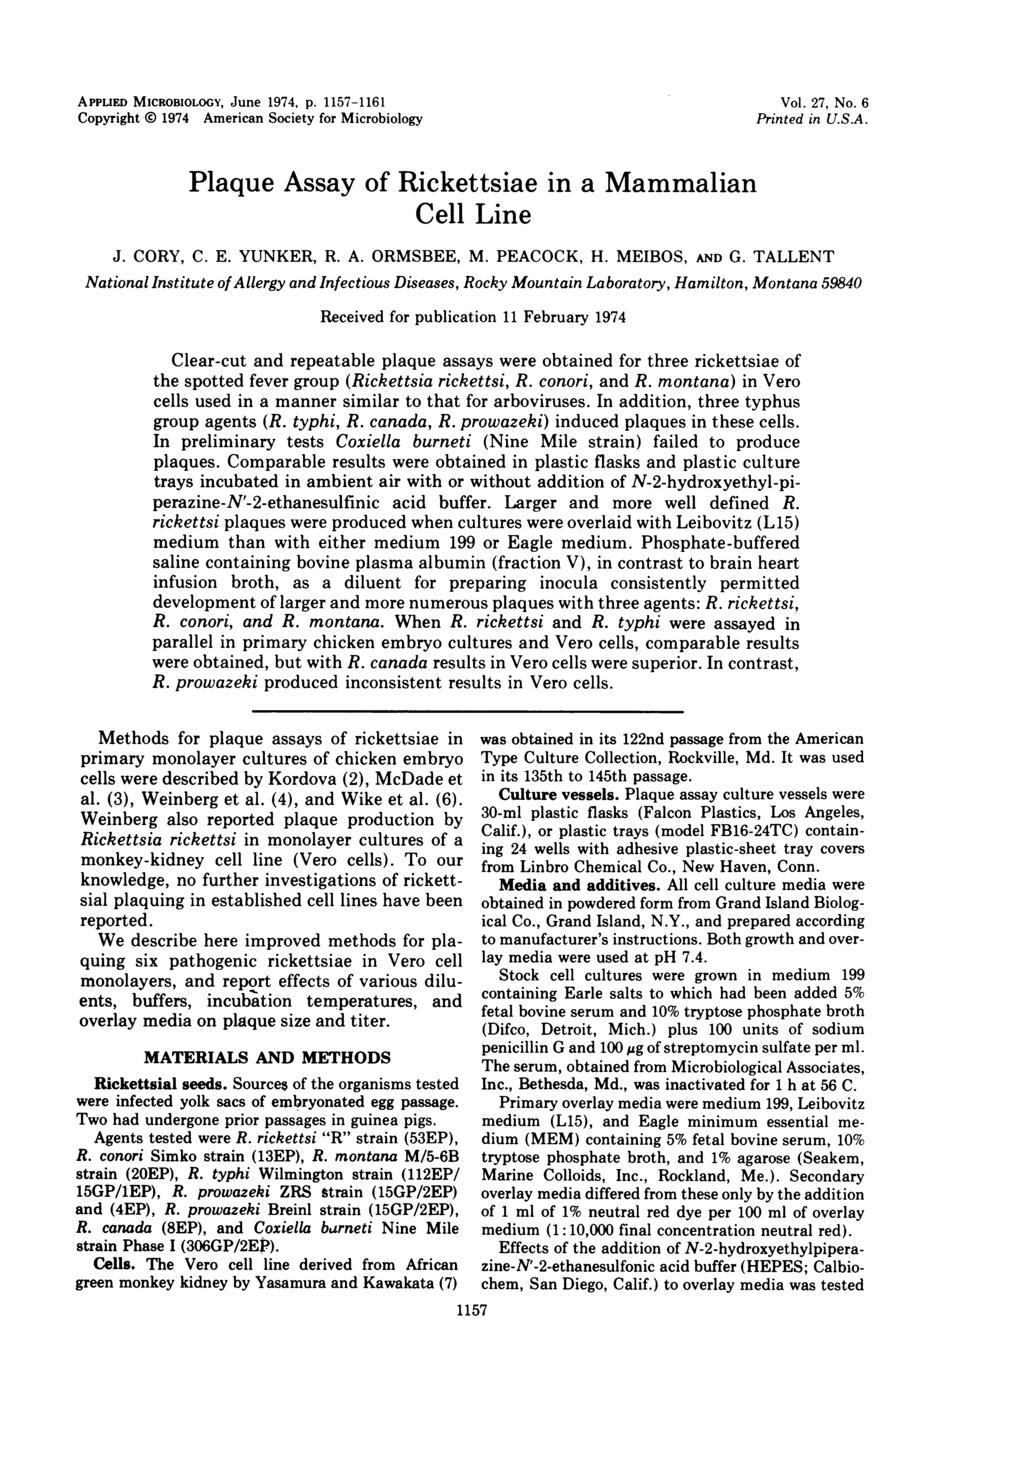 APPLIED MICROBIOLOGY, June 1974, p. 1157-1161 Copyright 0 1974 American Society for Microbiology Vol. 27, No. 6 Printed in U.S.A. Plaque Assay of Rickettsiae in a Mammalian Cell Line J. CORY, C. E.